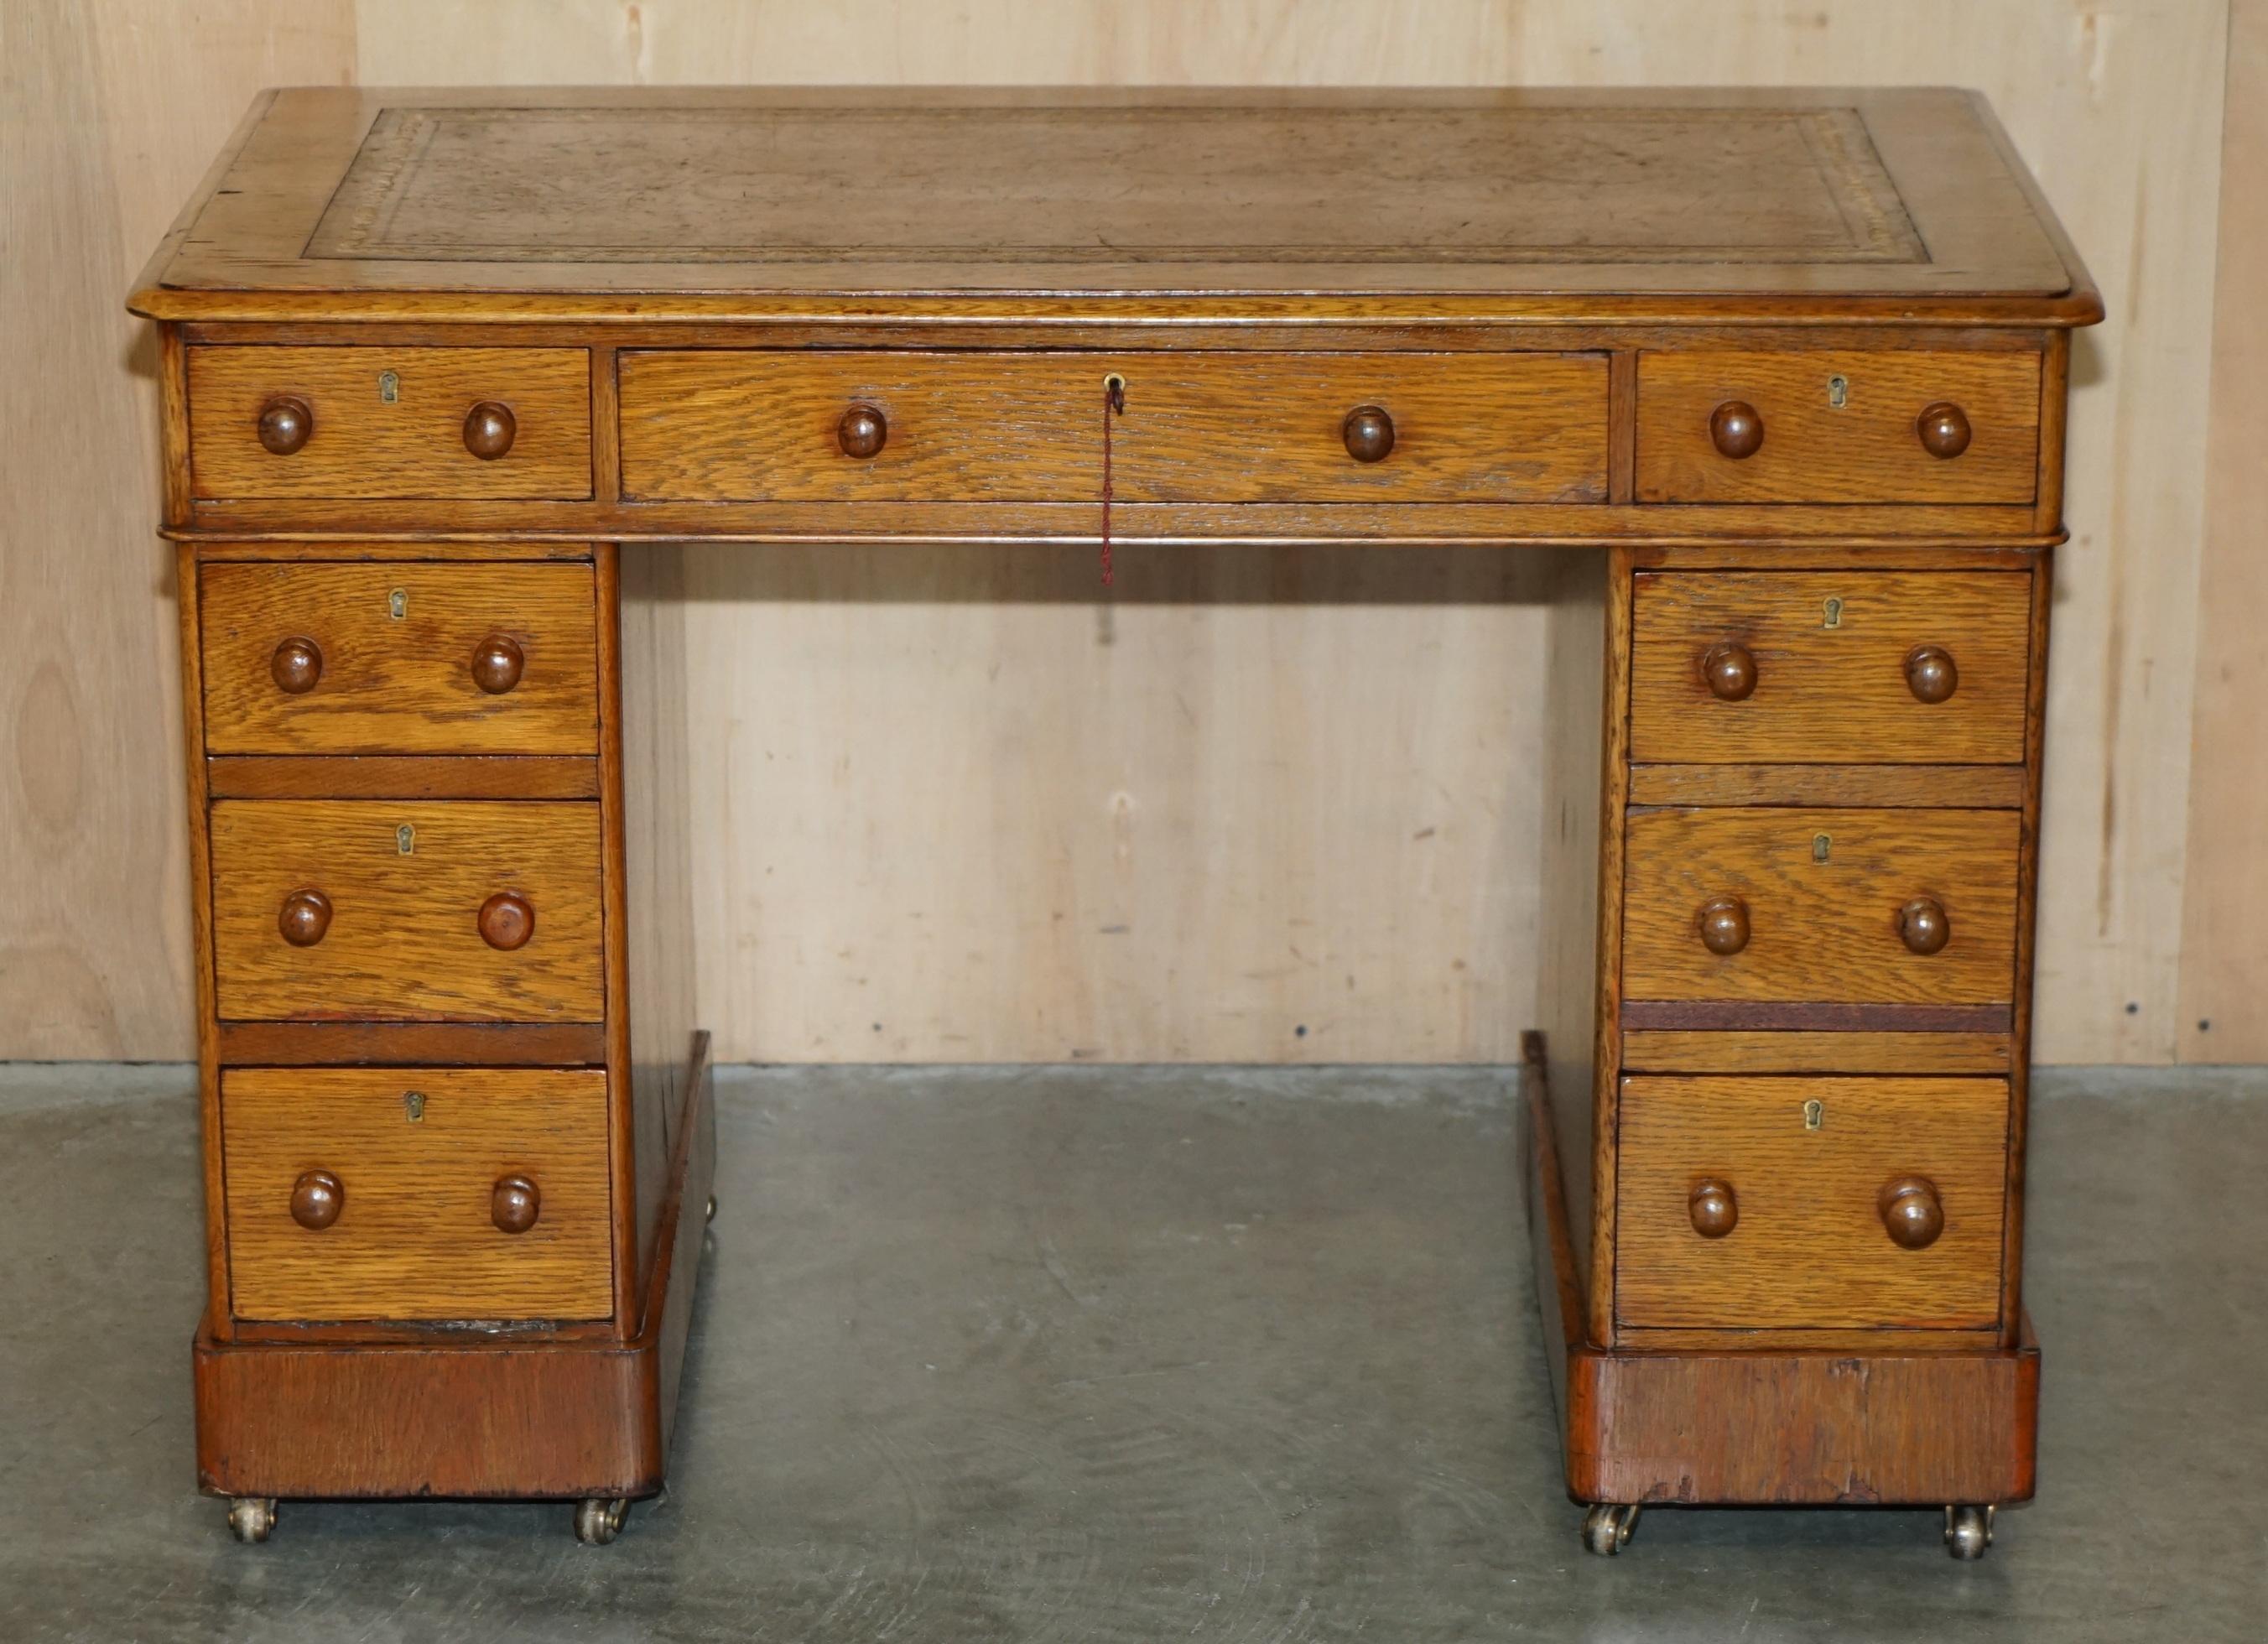 Royal House Antiques

Royal House Antiques is delighted to offer for sale this absolutely sublime circa 1860-1880 Honey Oak Victorian pedestal desk with aged hand dyed brown leather writing surface 

Please note the delivery fee listed is just a